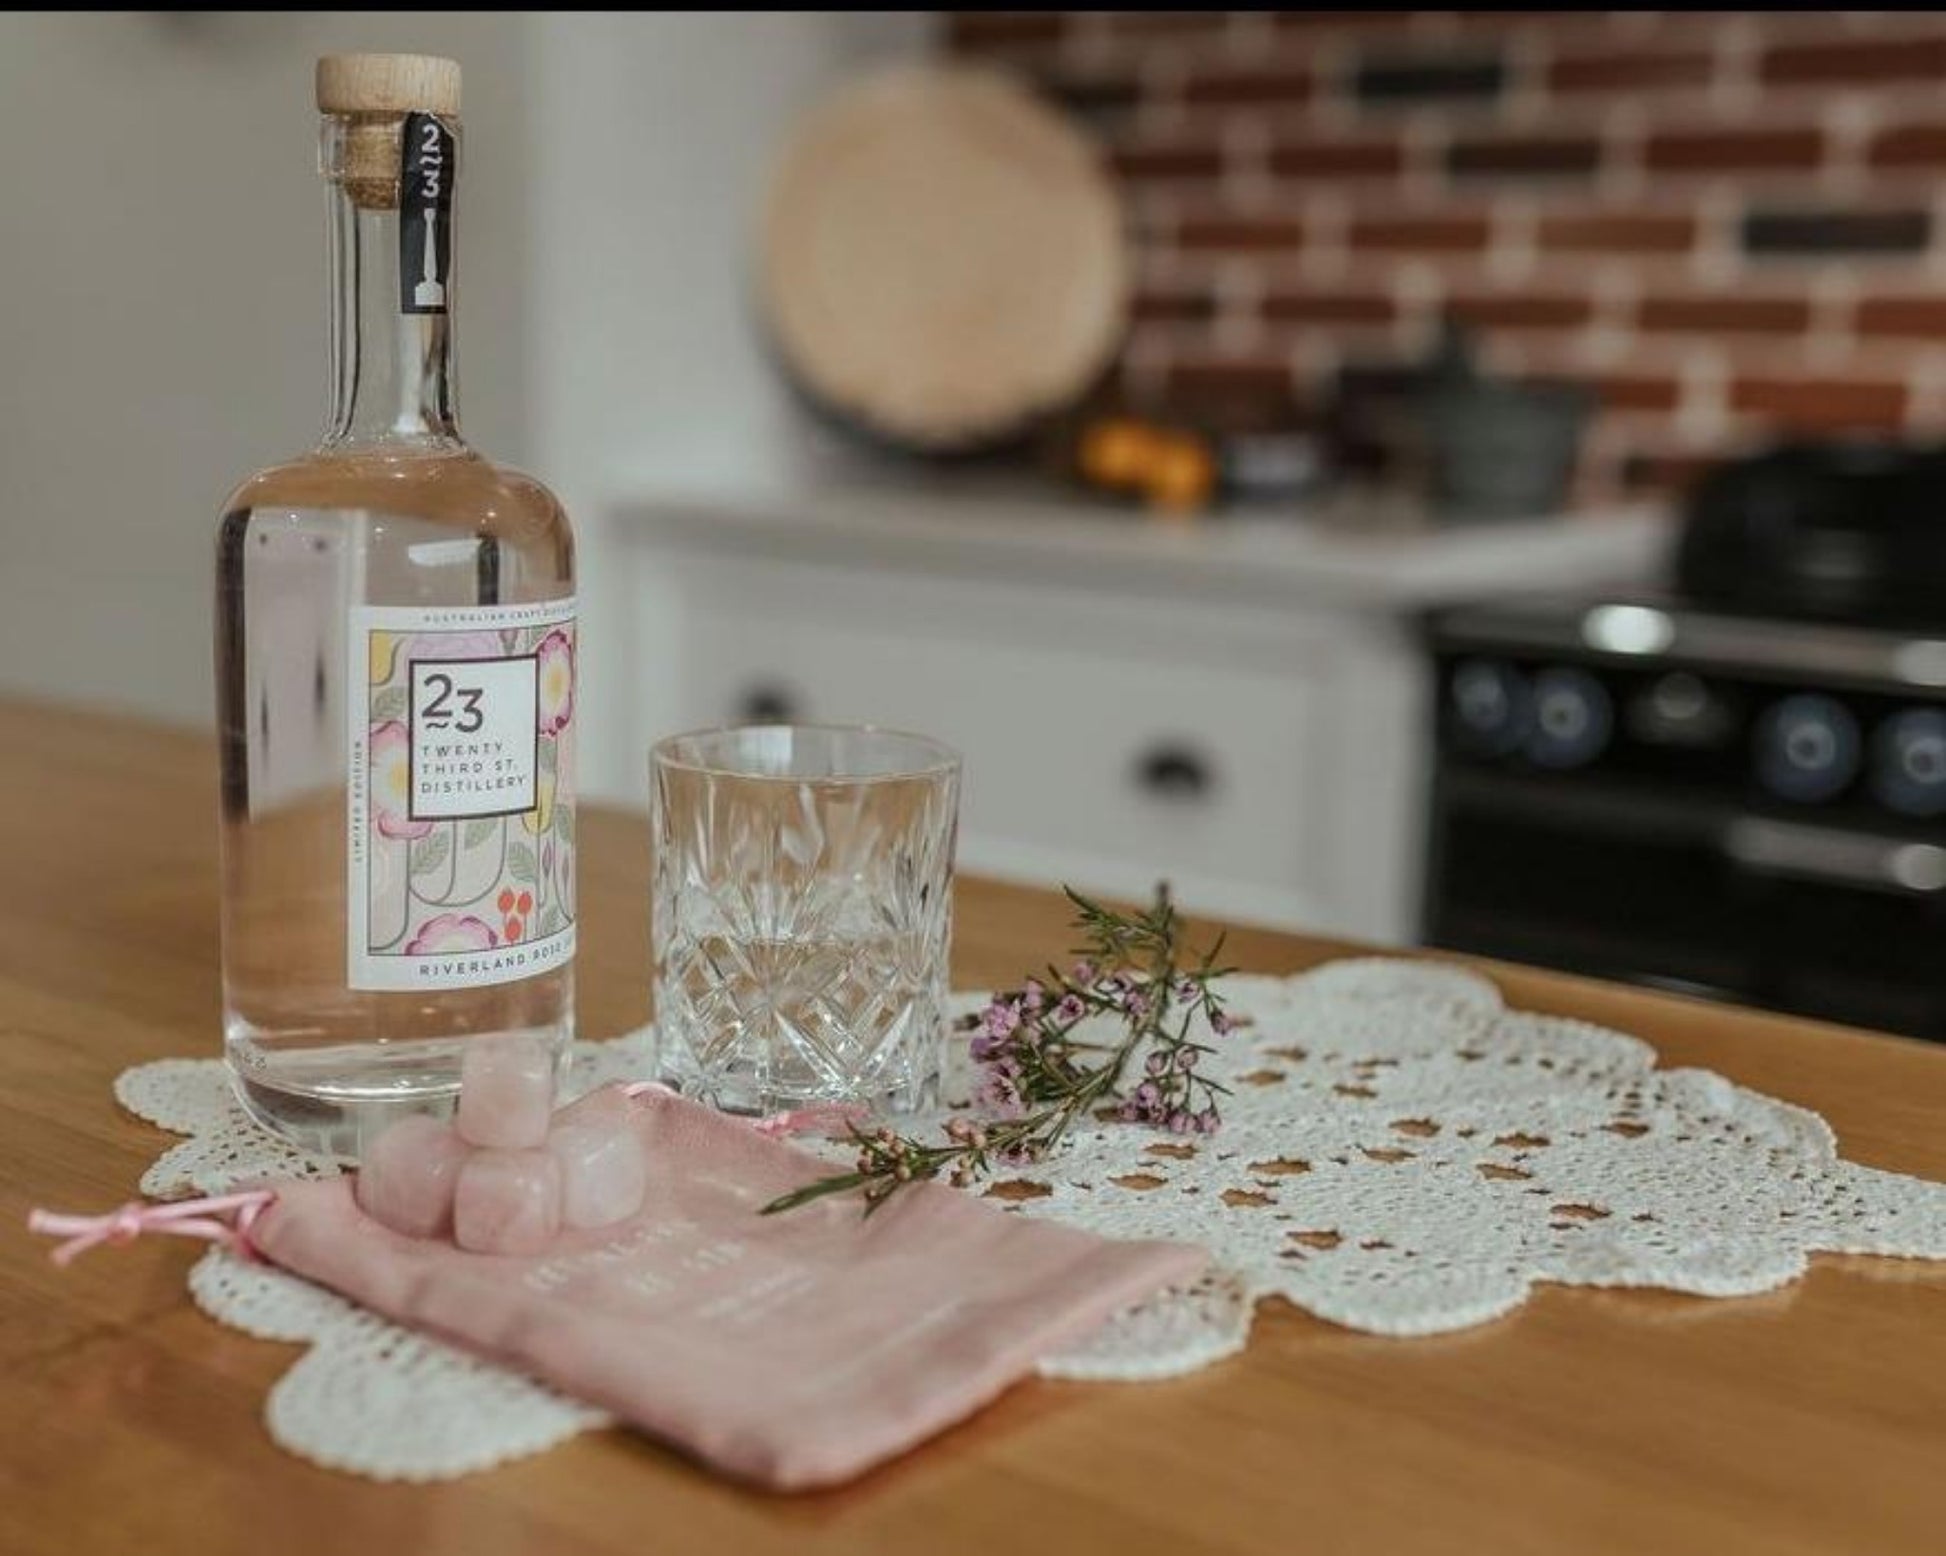 rose quartz gin stones and pouch displayed with a bottle of gin and glass